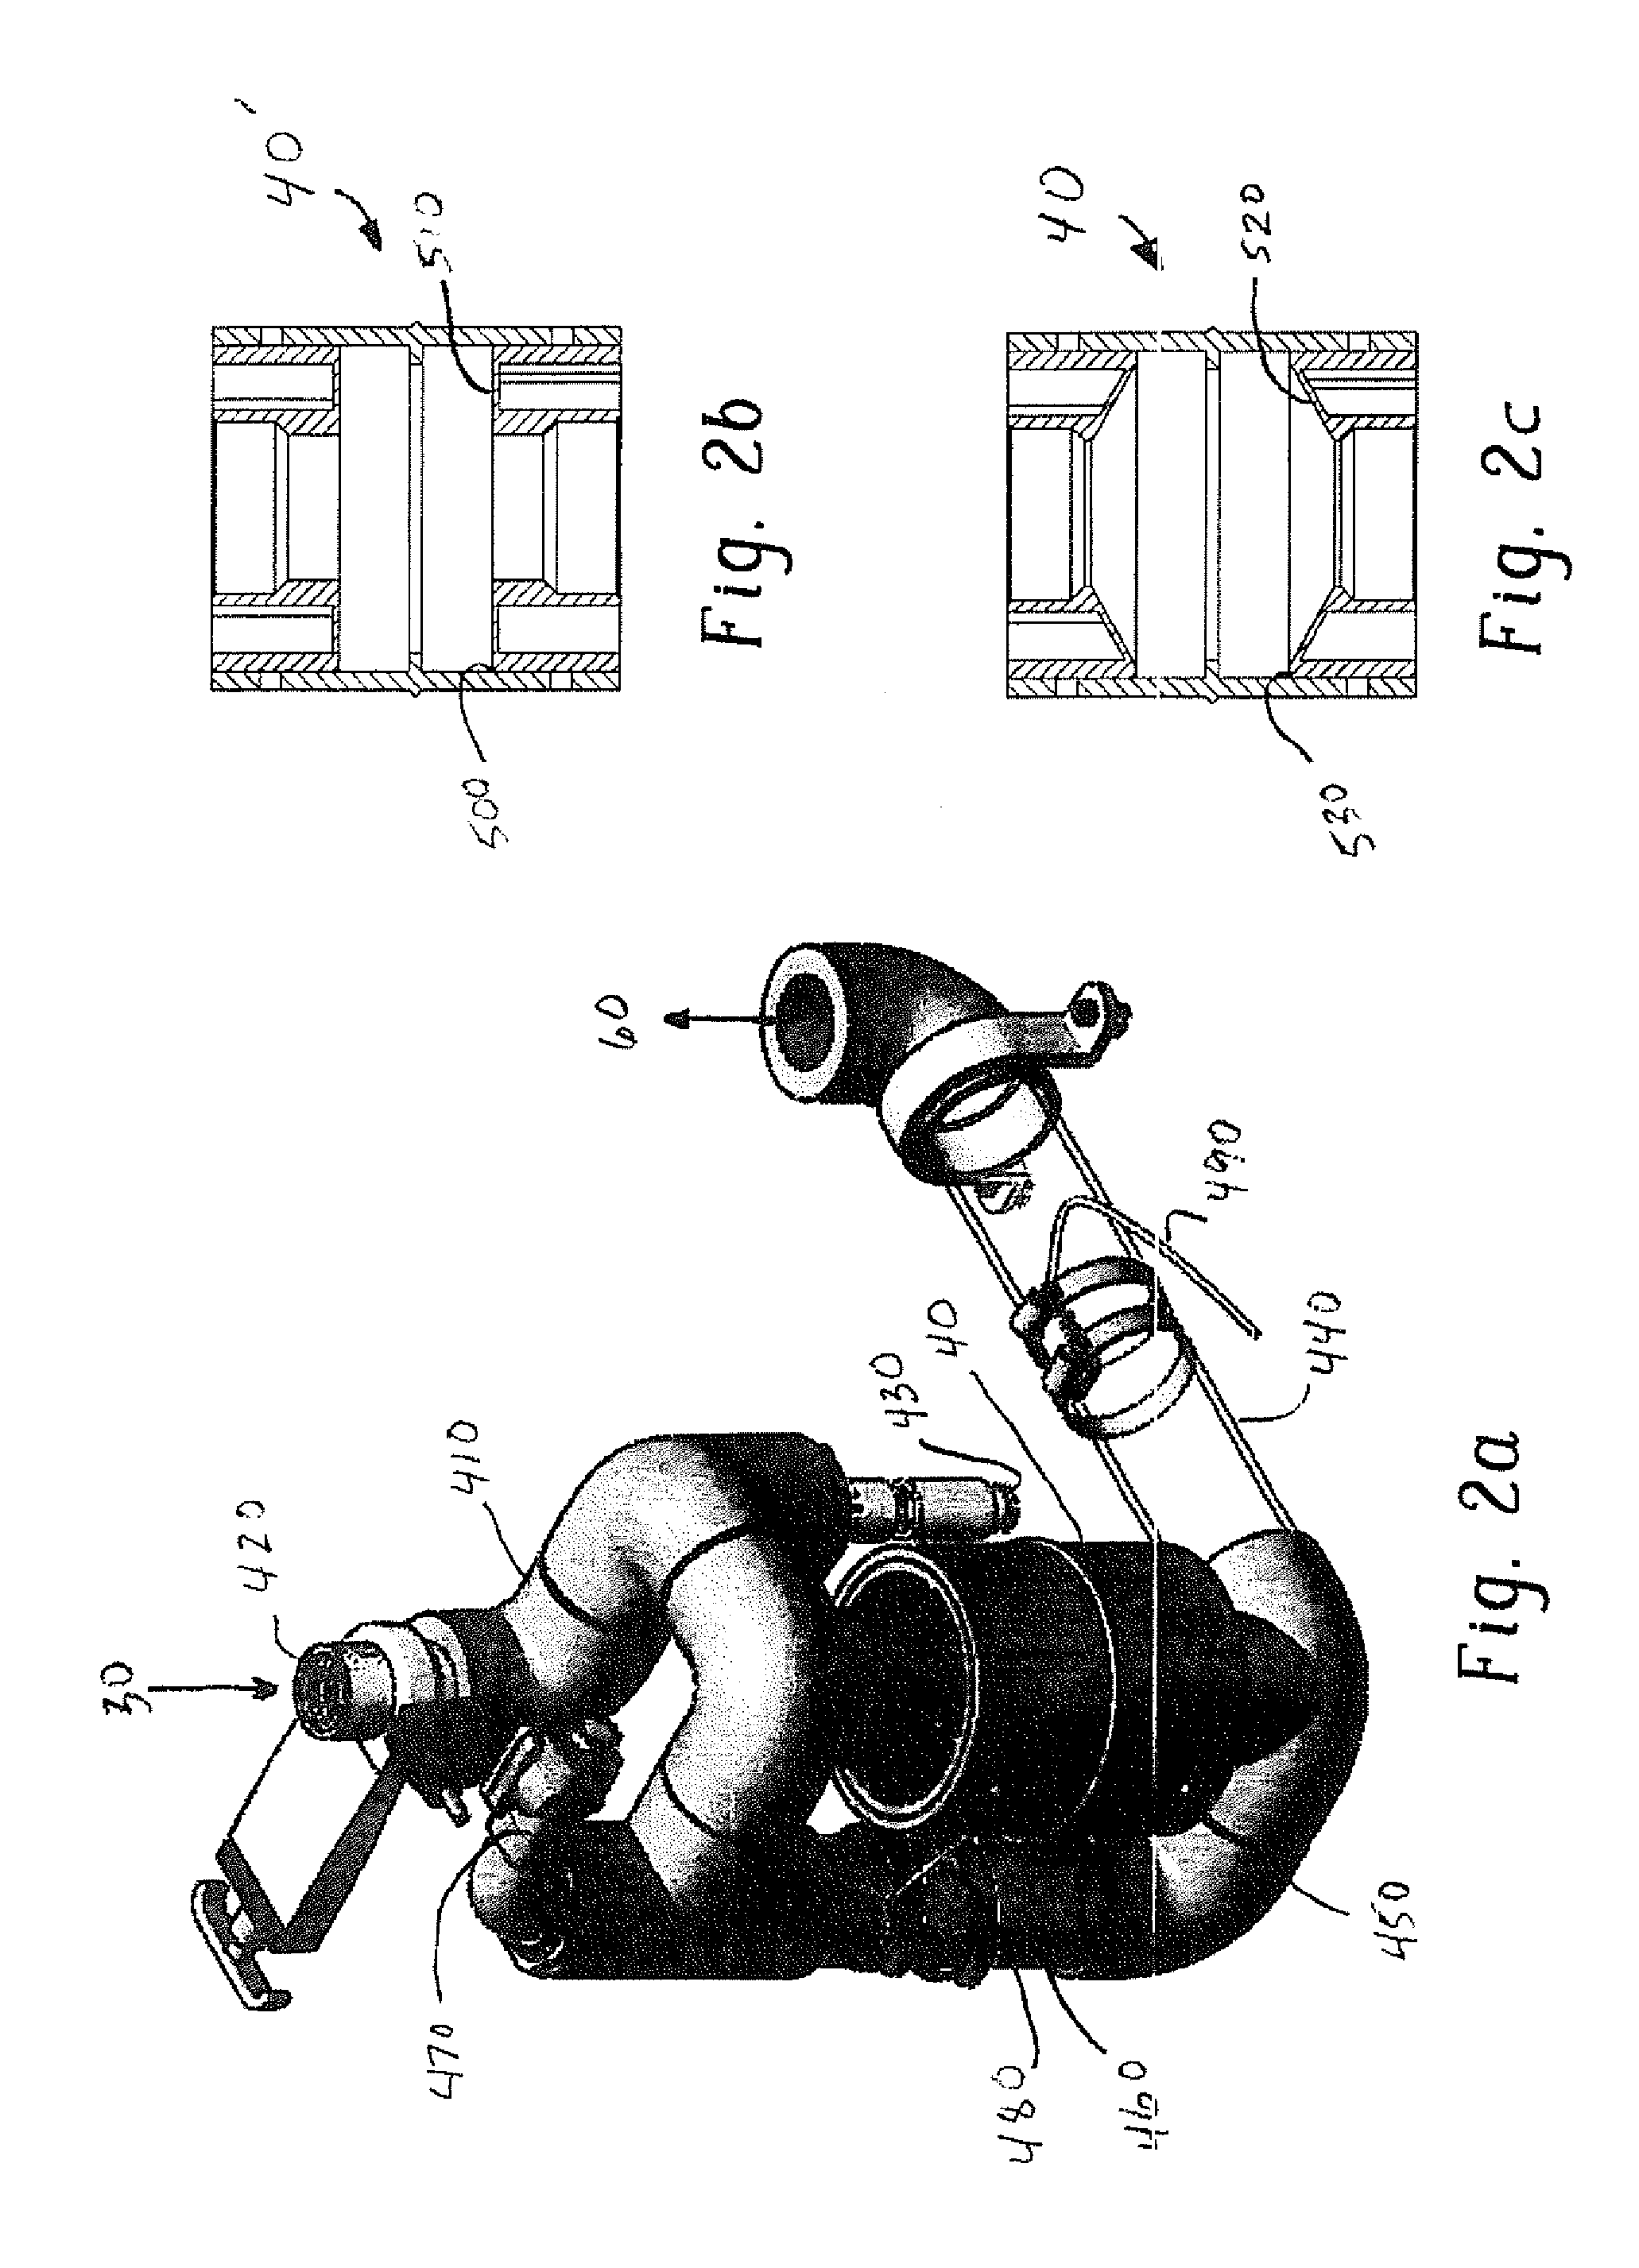 Improved, low viscosity, shelf stable, energy-actiivated compositions, equipment, sytems and methods for producing same